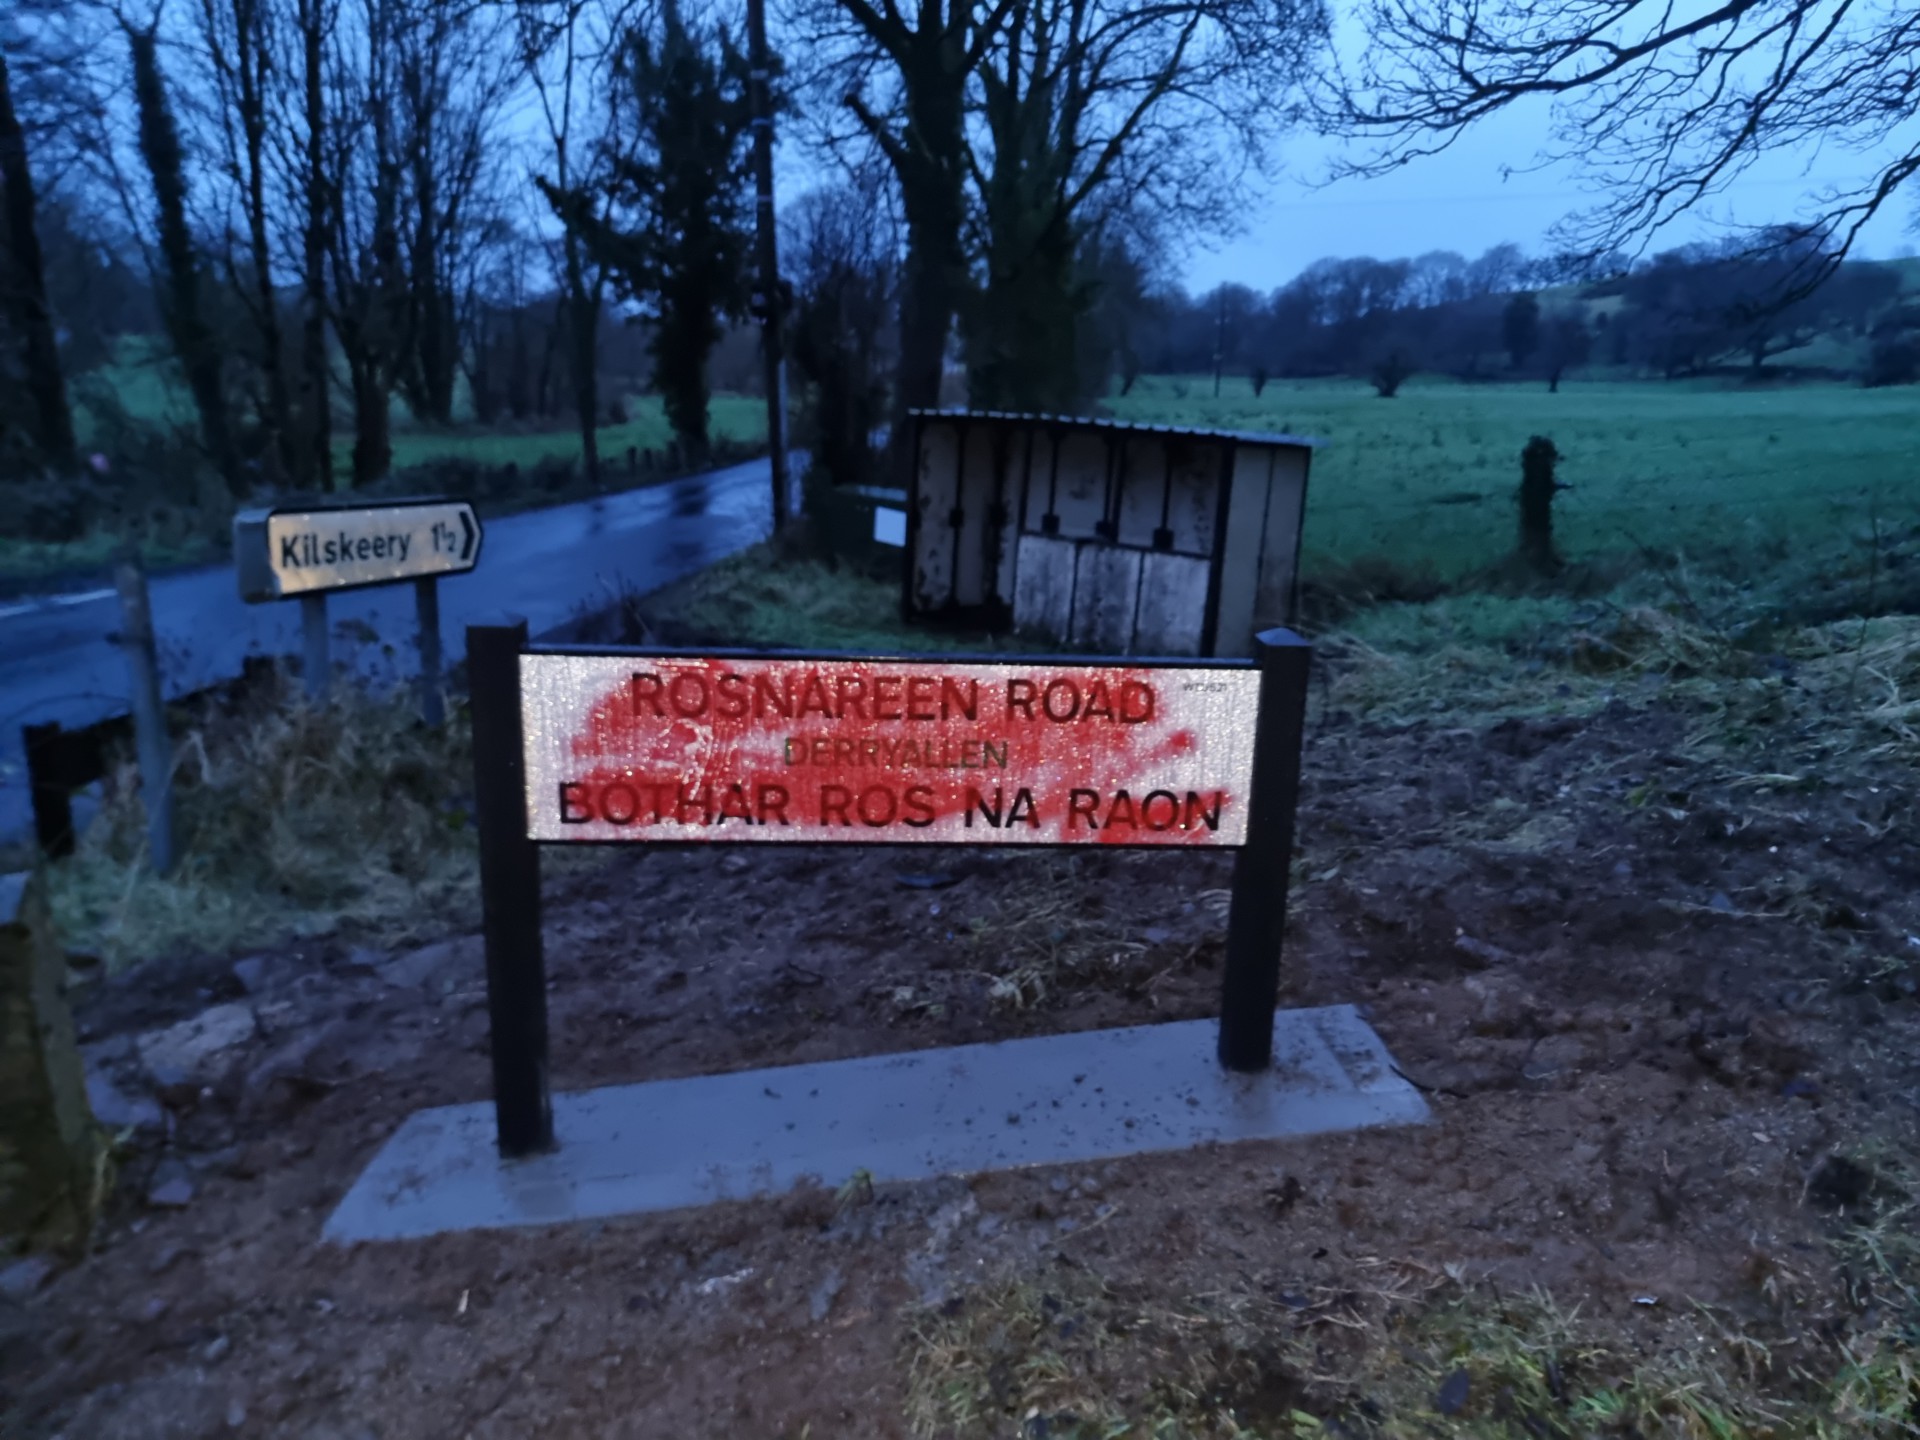 Vandal attack on road signs a ‘hate crime’